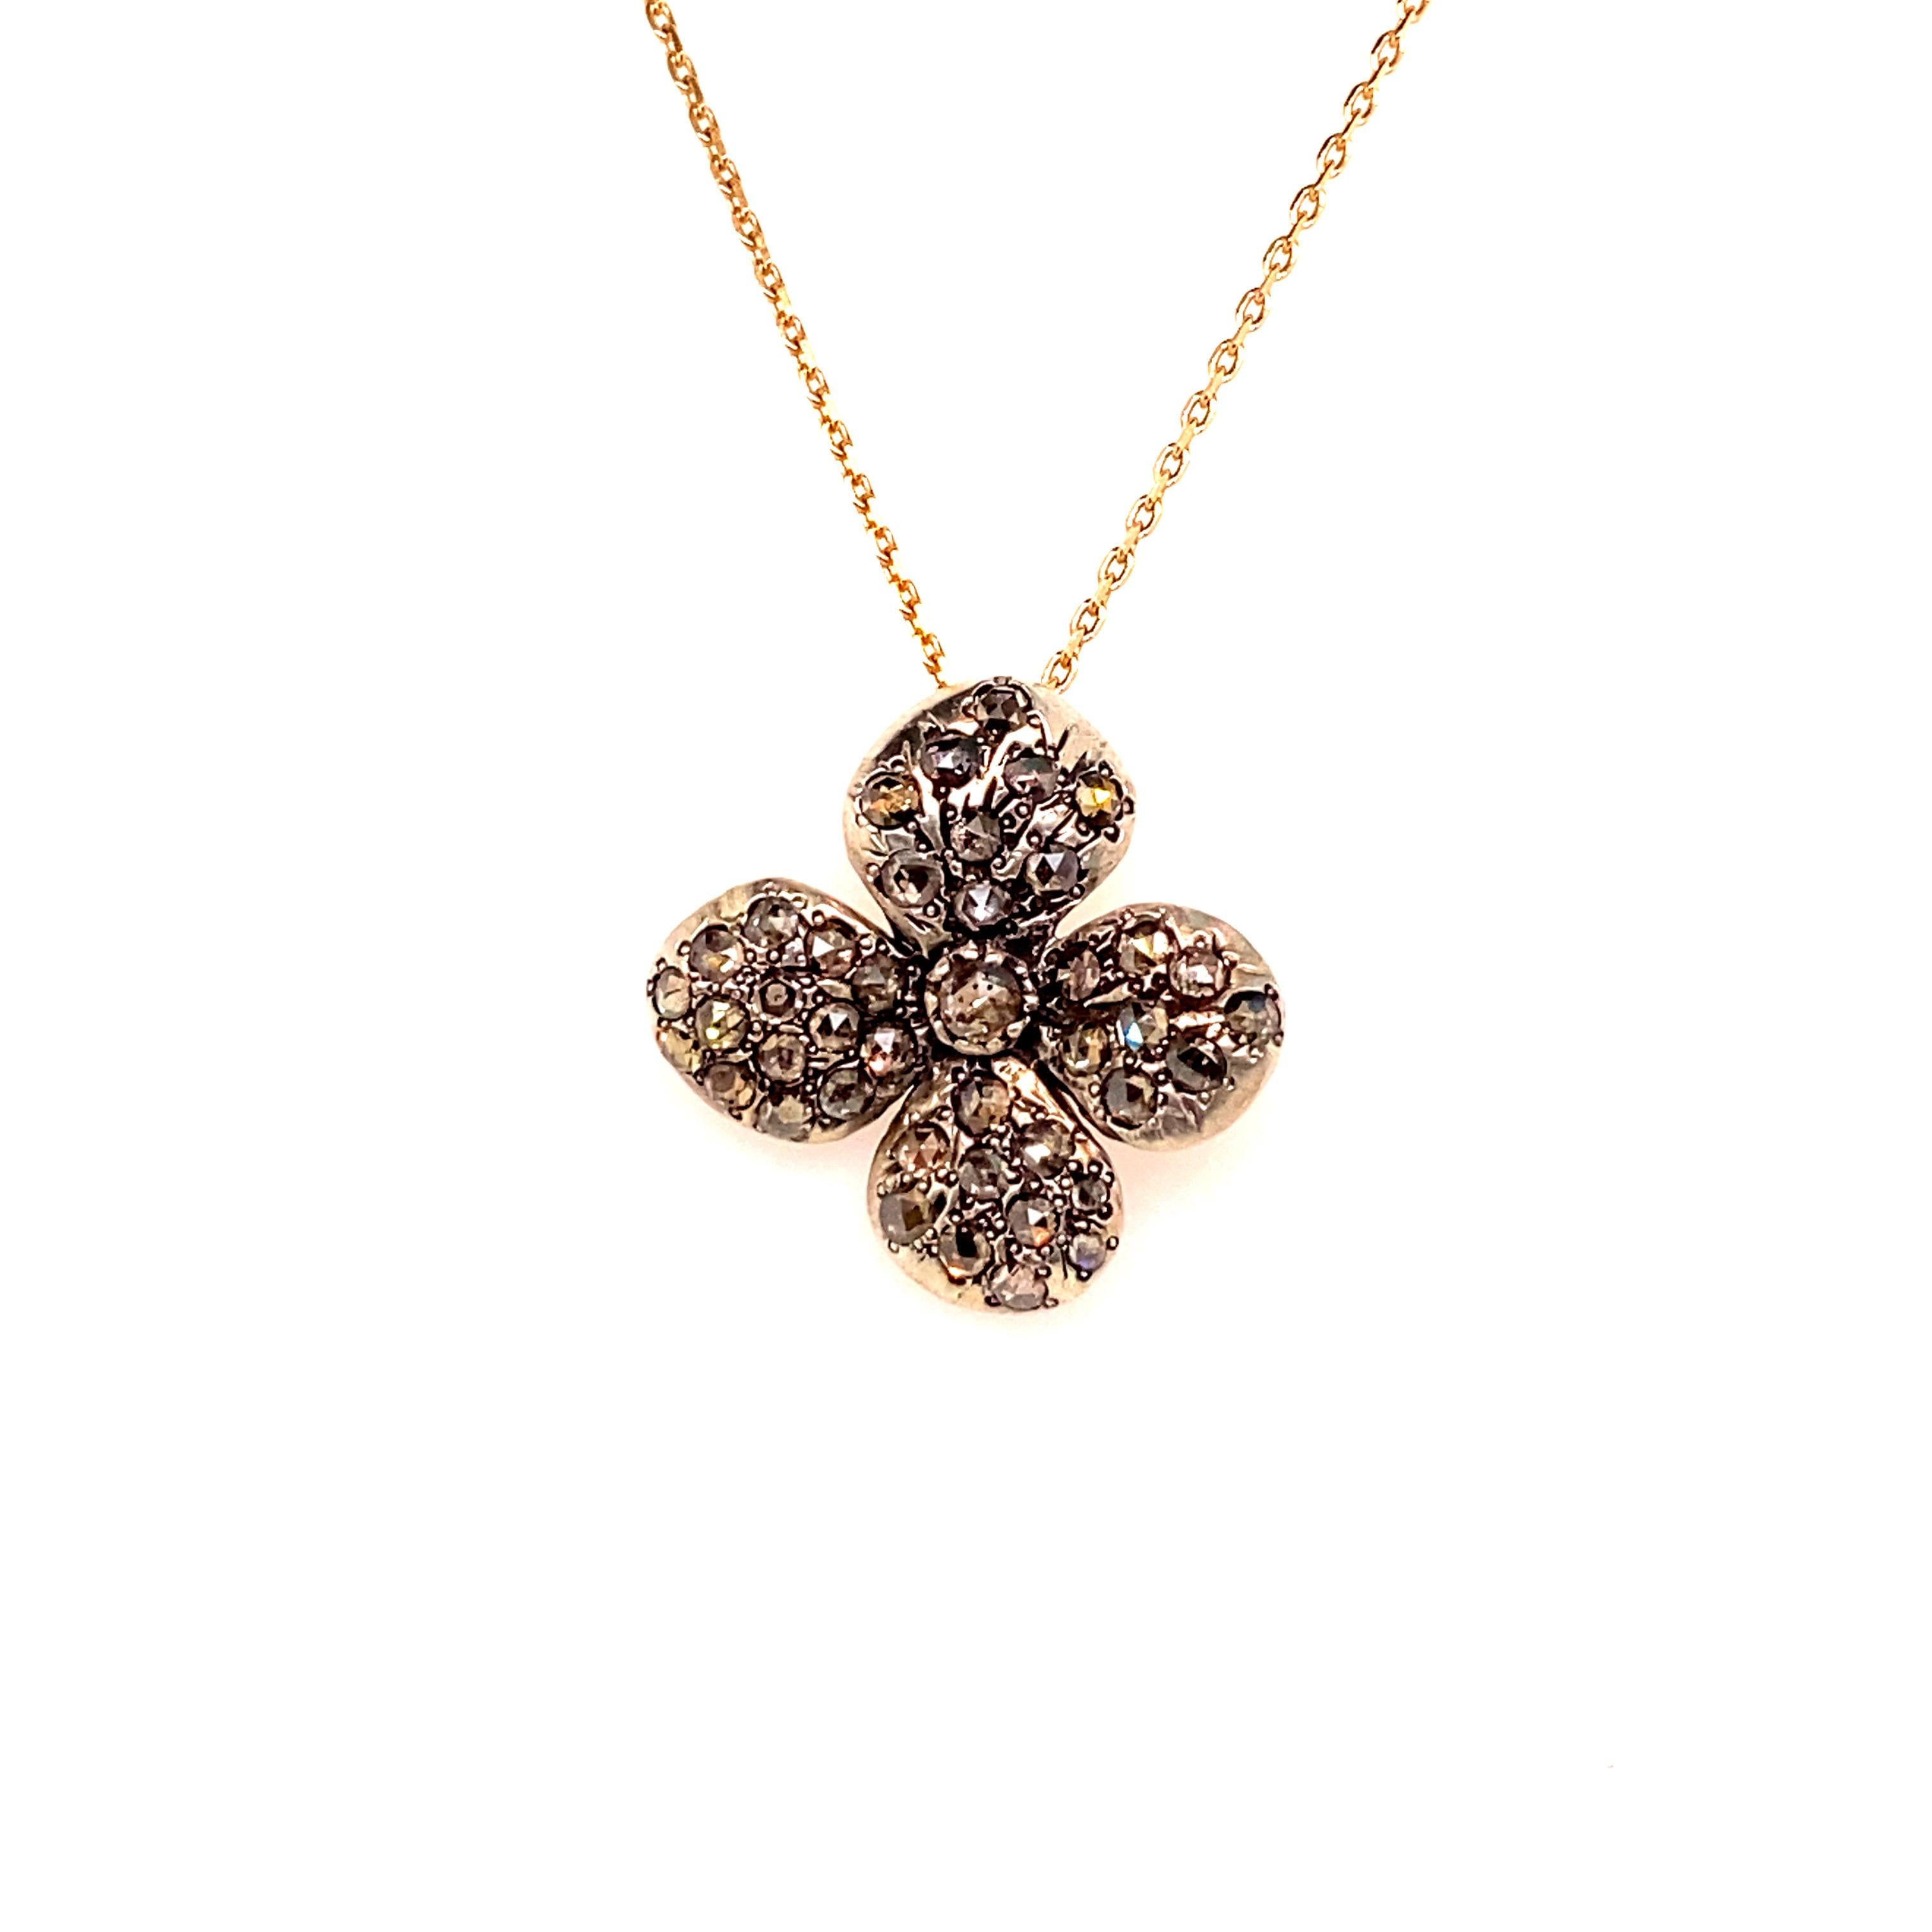 Contemporary 21st Century 9 Karat Rose Gold and 925 Silver Diamond Pendant and Chain For Sale